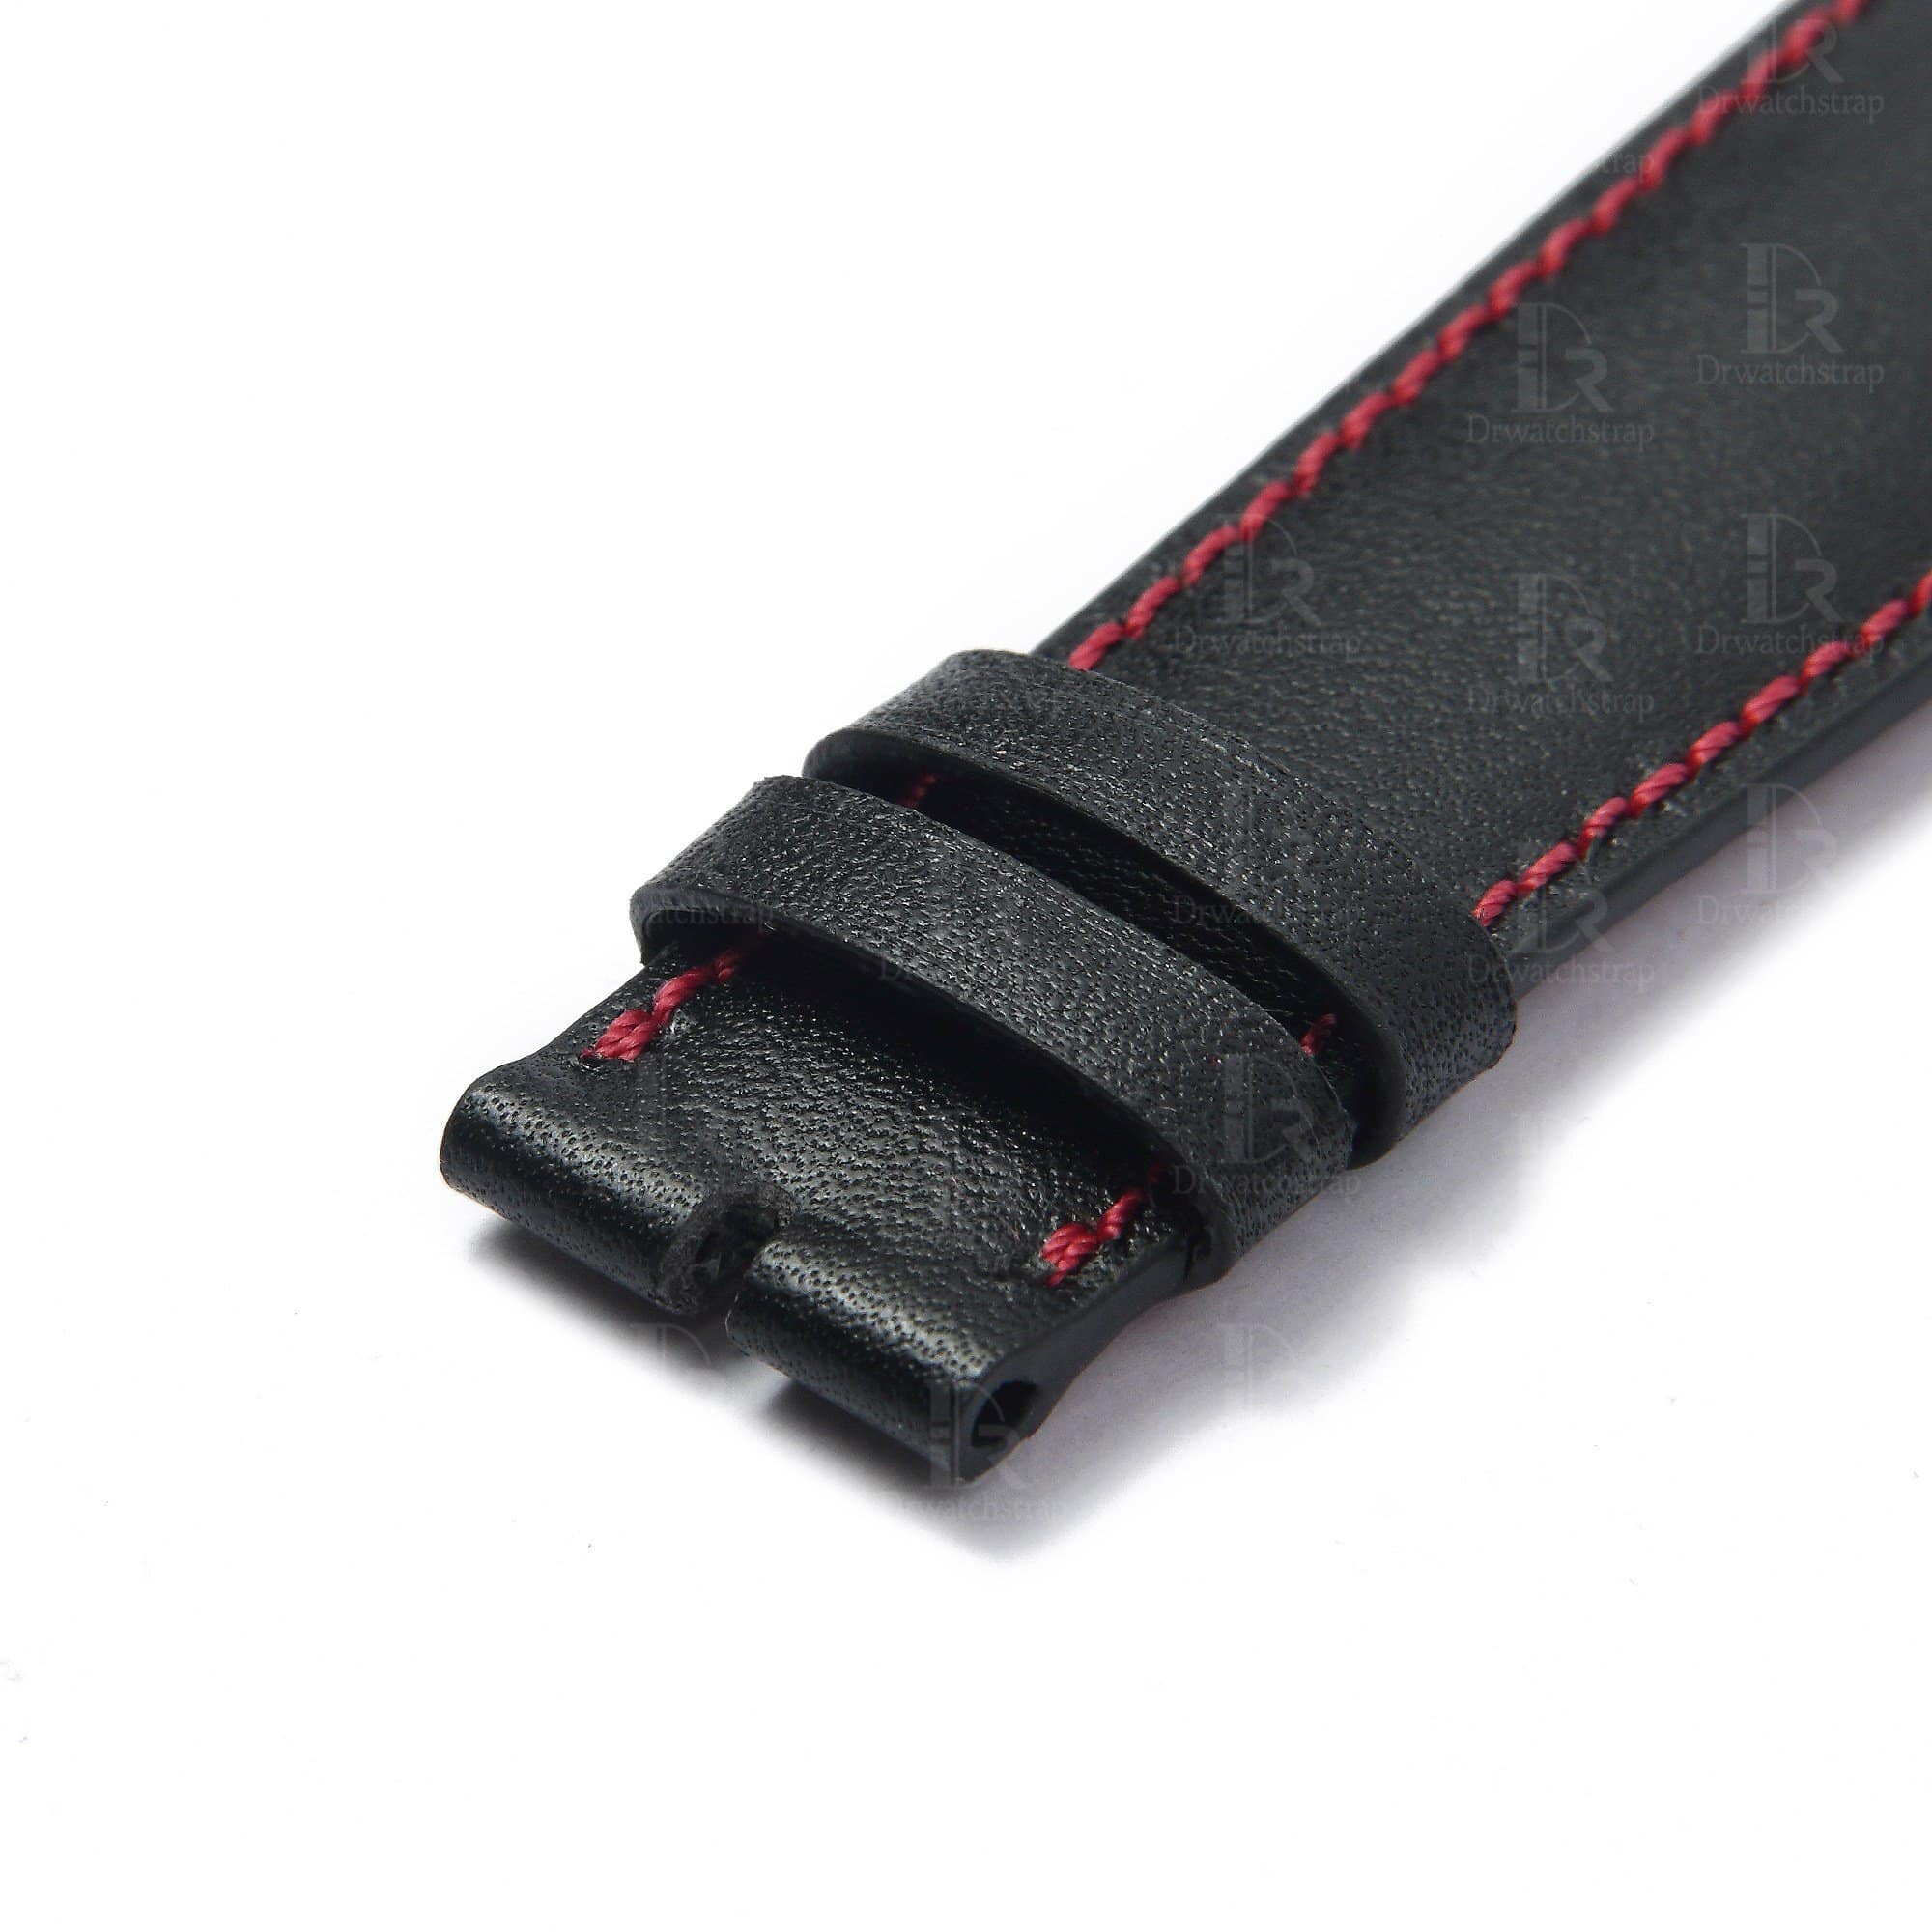 Best quality handmade OEM premium black calfskin replacement Tudor leather strap and watch band with red linning for Black Bay 58 41 GMT Heritage luxury watches 20mm 22mm 24mm online at a low price - Shop the premium watchs traps online